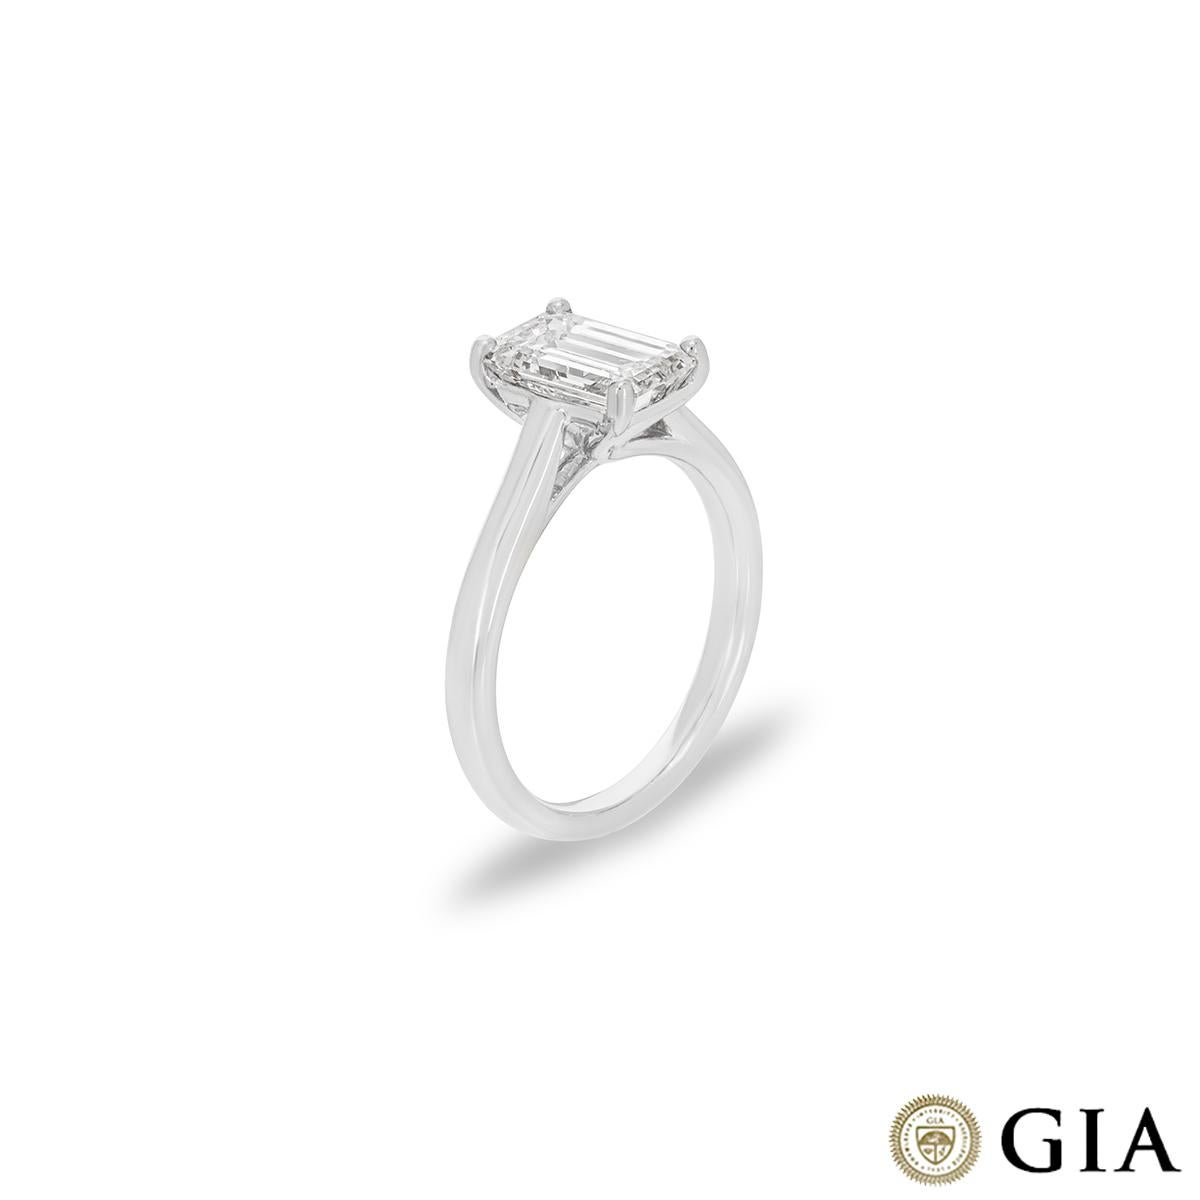 A gorgeous platinum diamond engagement ring. The solitaire is set to the centre with an emerald cut diamond weighing 2.01ct, F colour and VS1 clarity. The ring measures 2mm in width, has a gross weight of 5.75 grams and is currently a UK size M½/ US